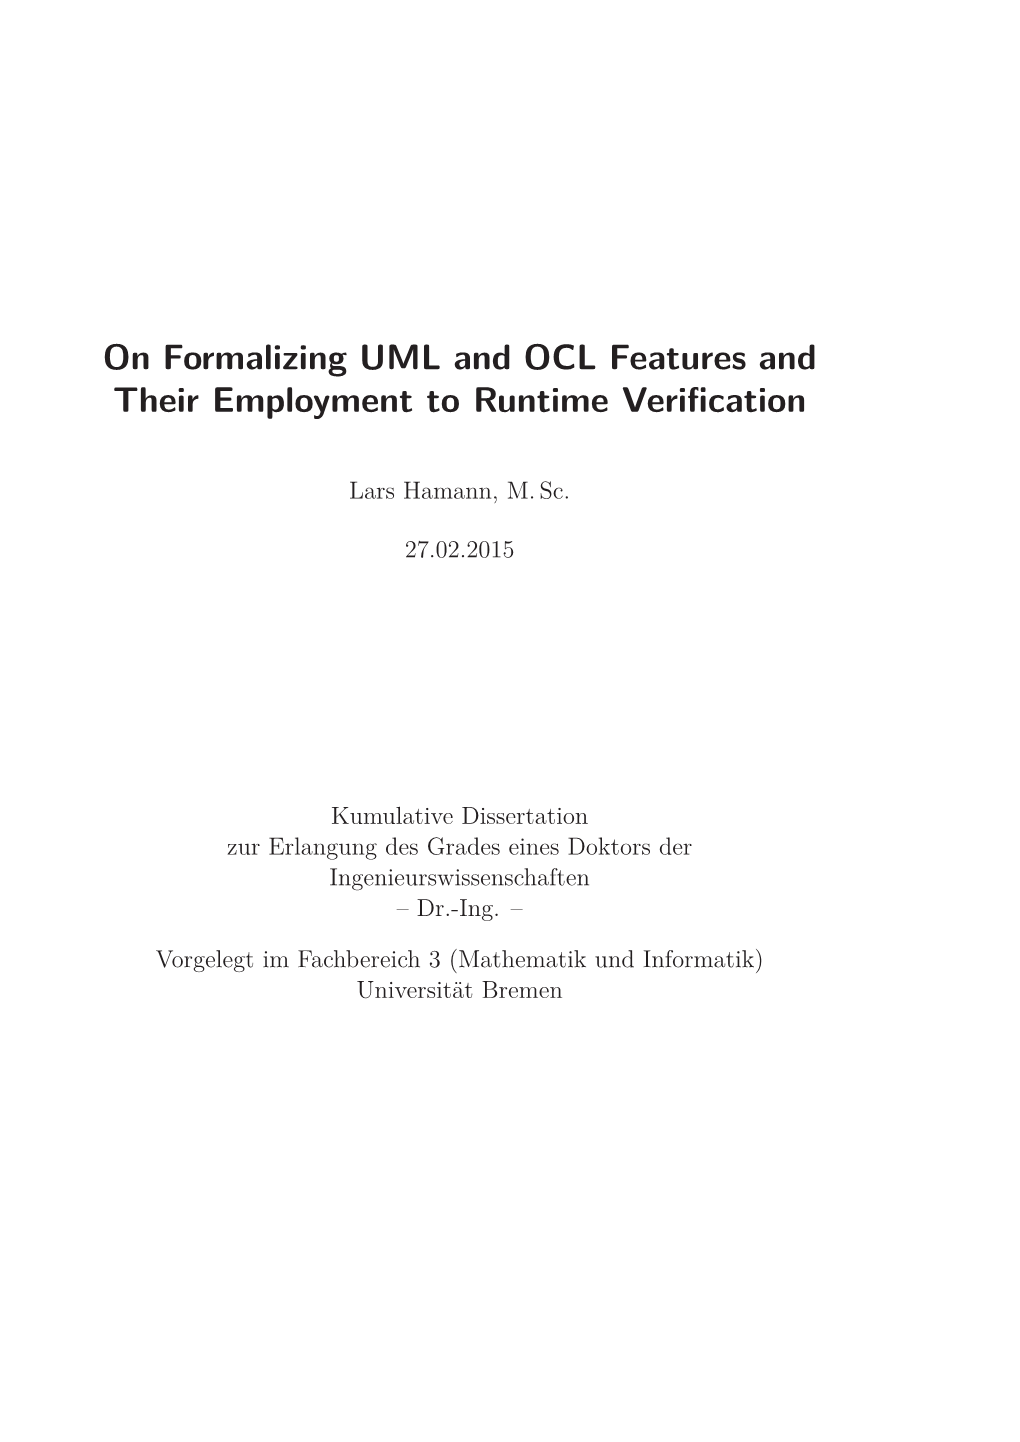 On Formalizing UML and OCL Features and Their Employment to Runtime Veriﬁcation